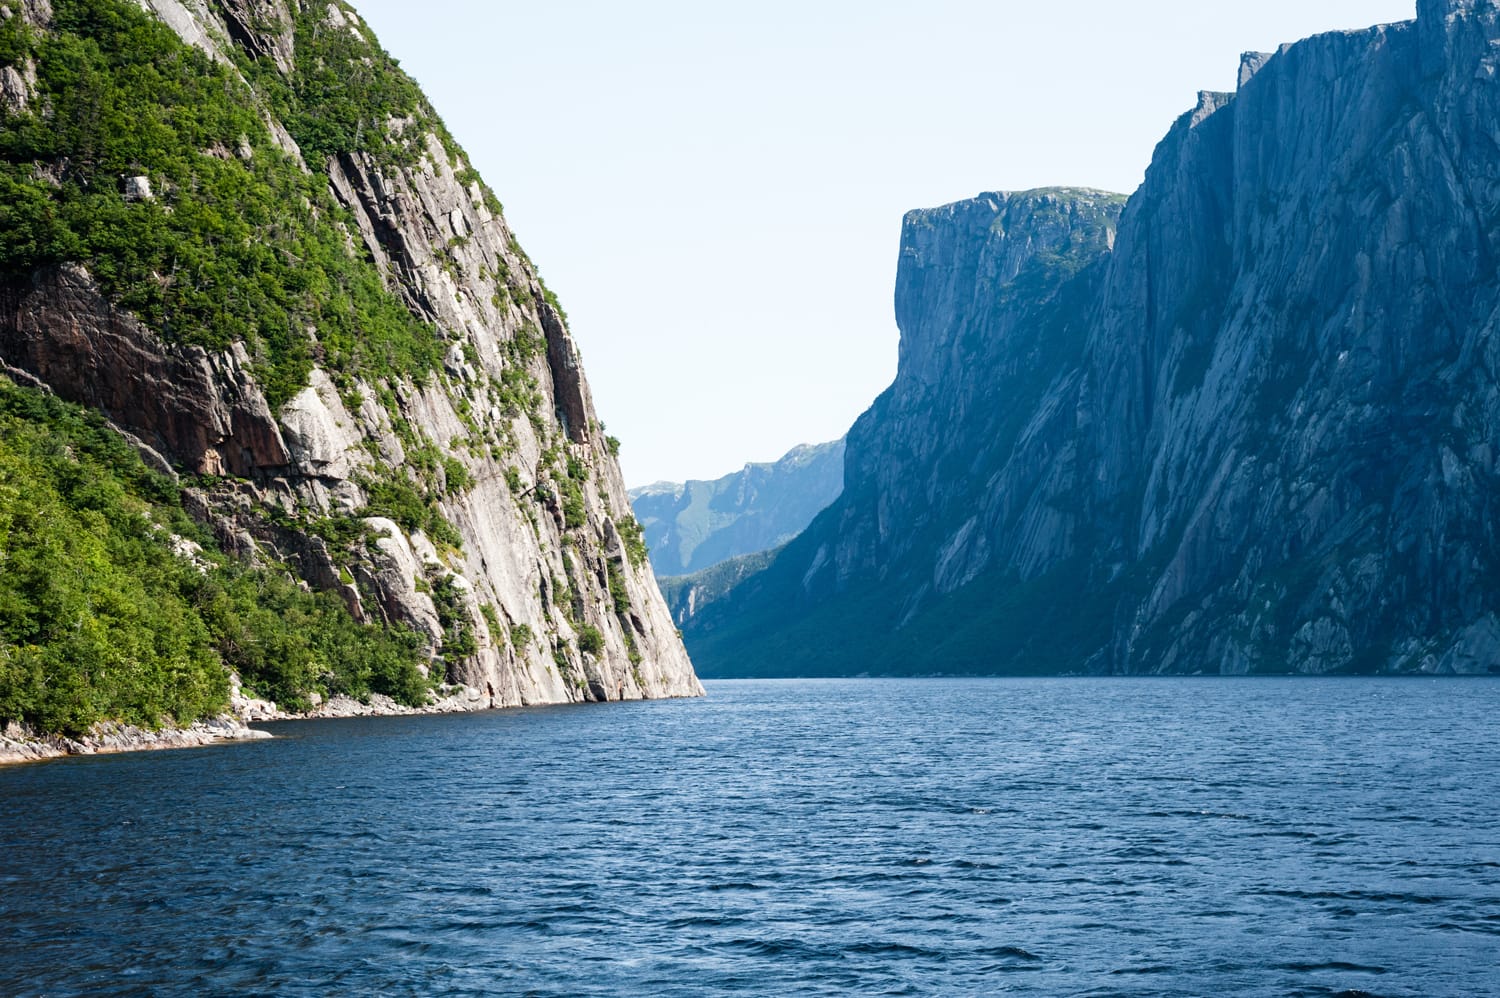 Inland fjord between large steep cliffs with some green vegetation on rock face, at Western Brook Pond, Gros Morne National Park, Newfoundland, Canada.